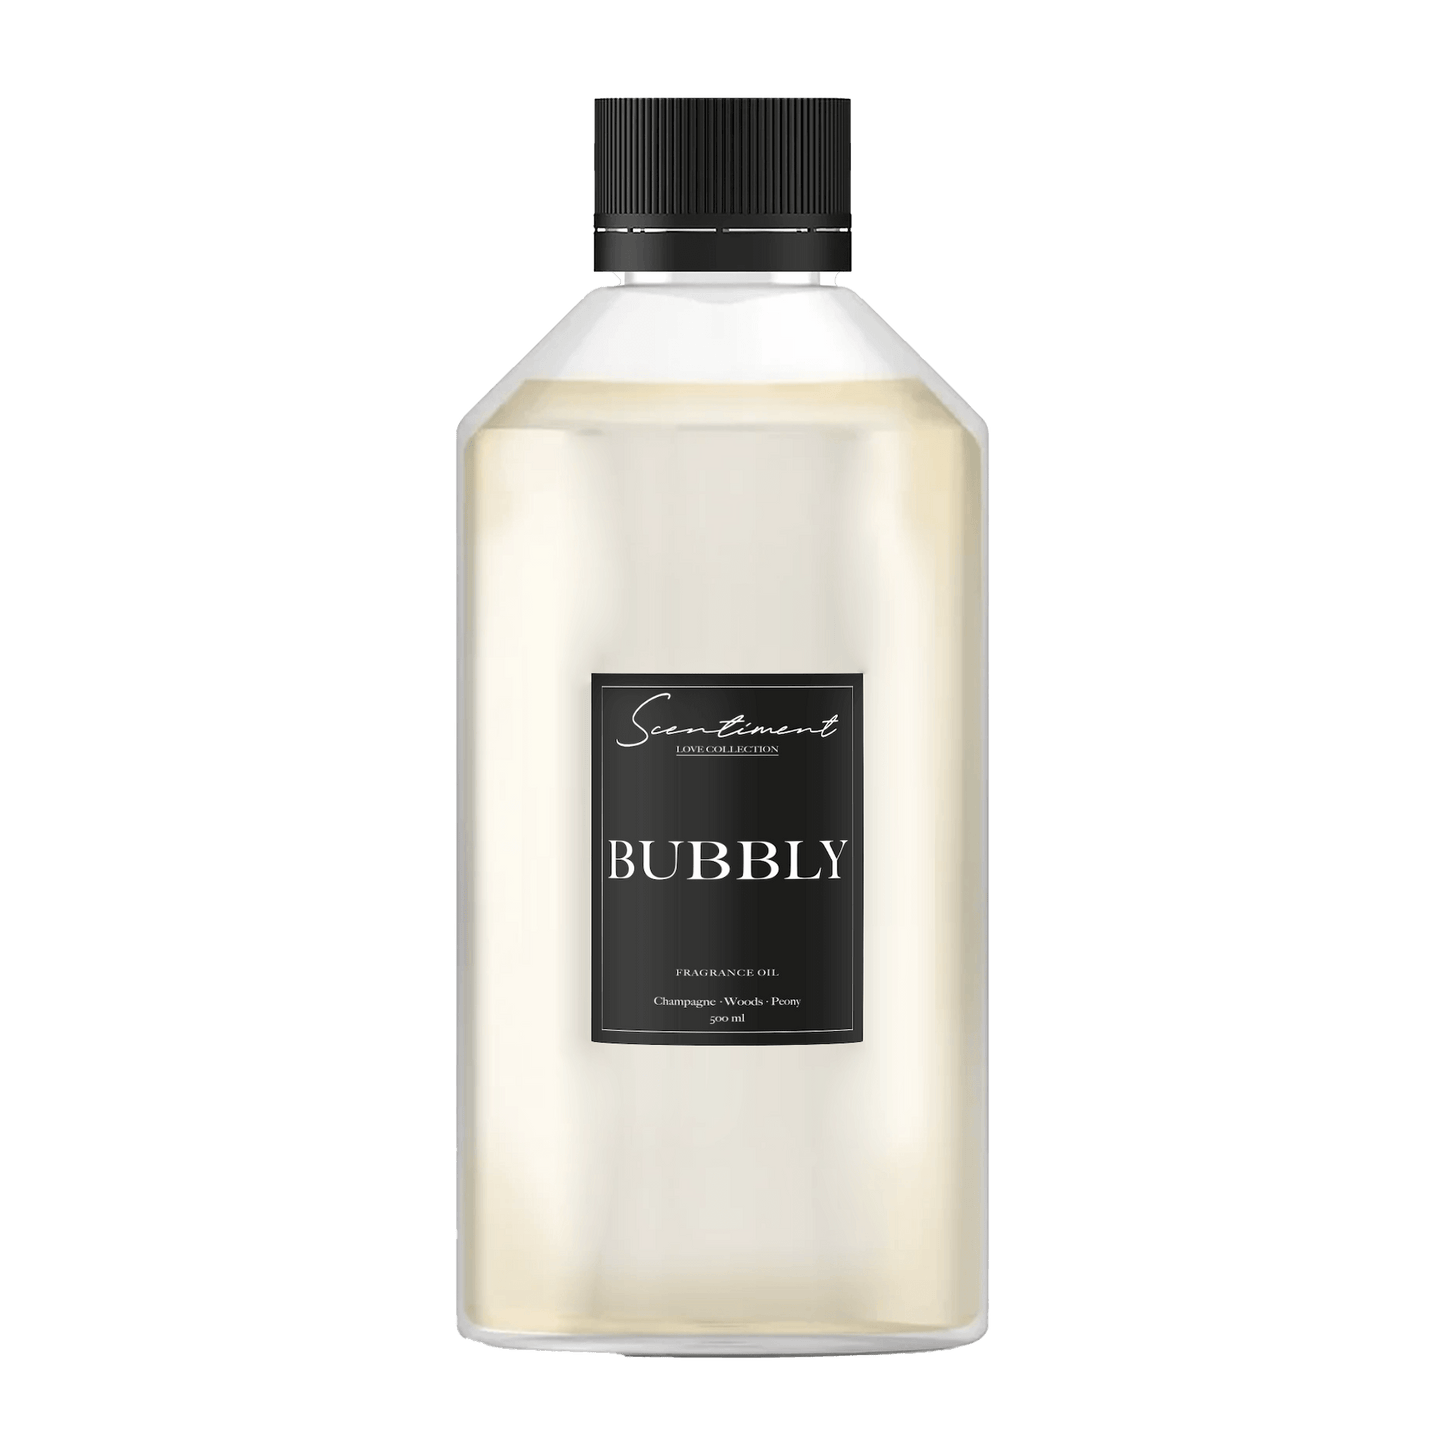 Bubbly Oil Fragrance, with notes of Champagne, Woods, and Peony.